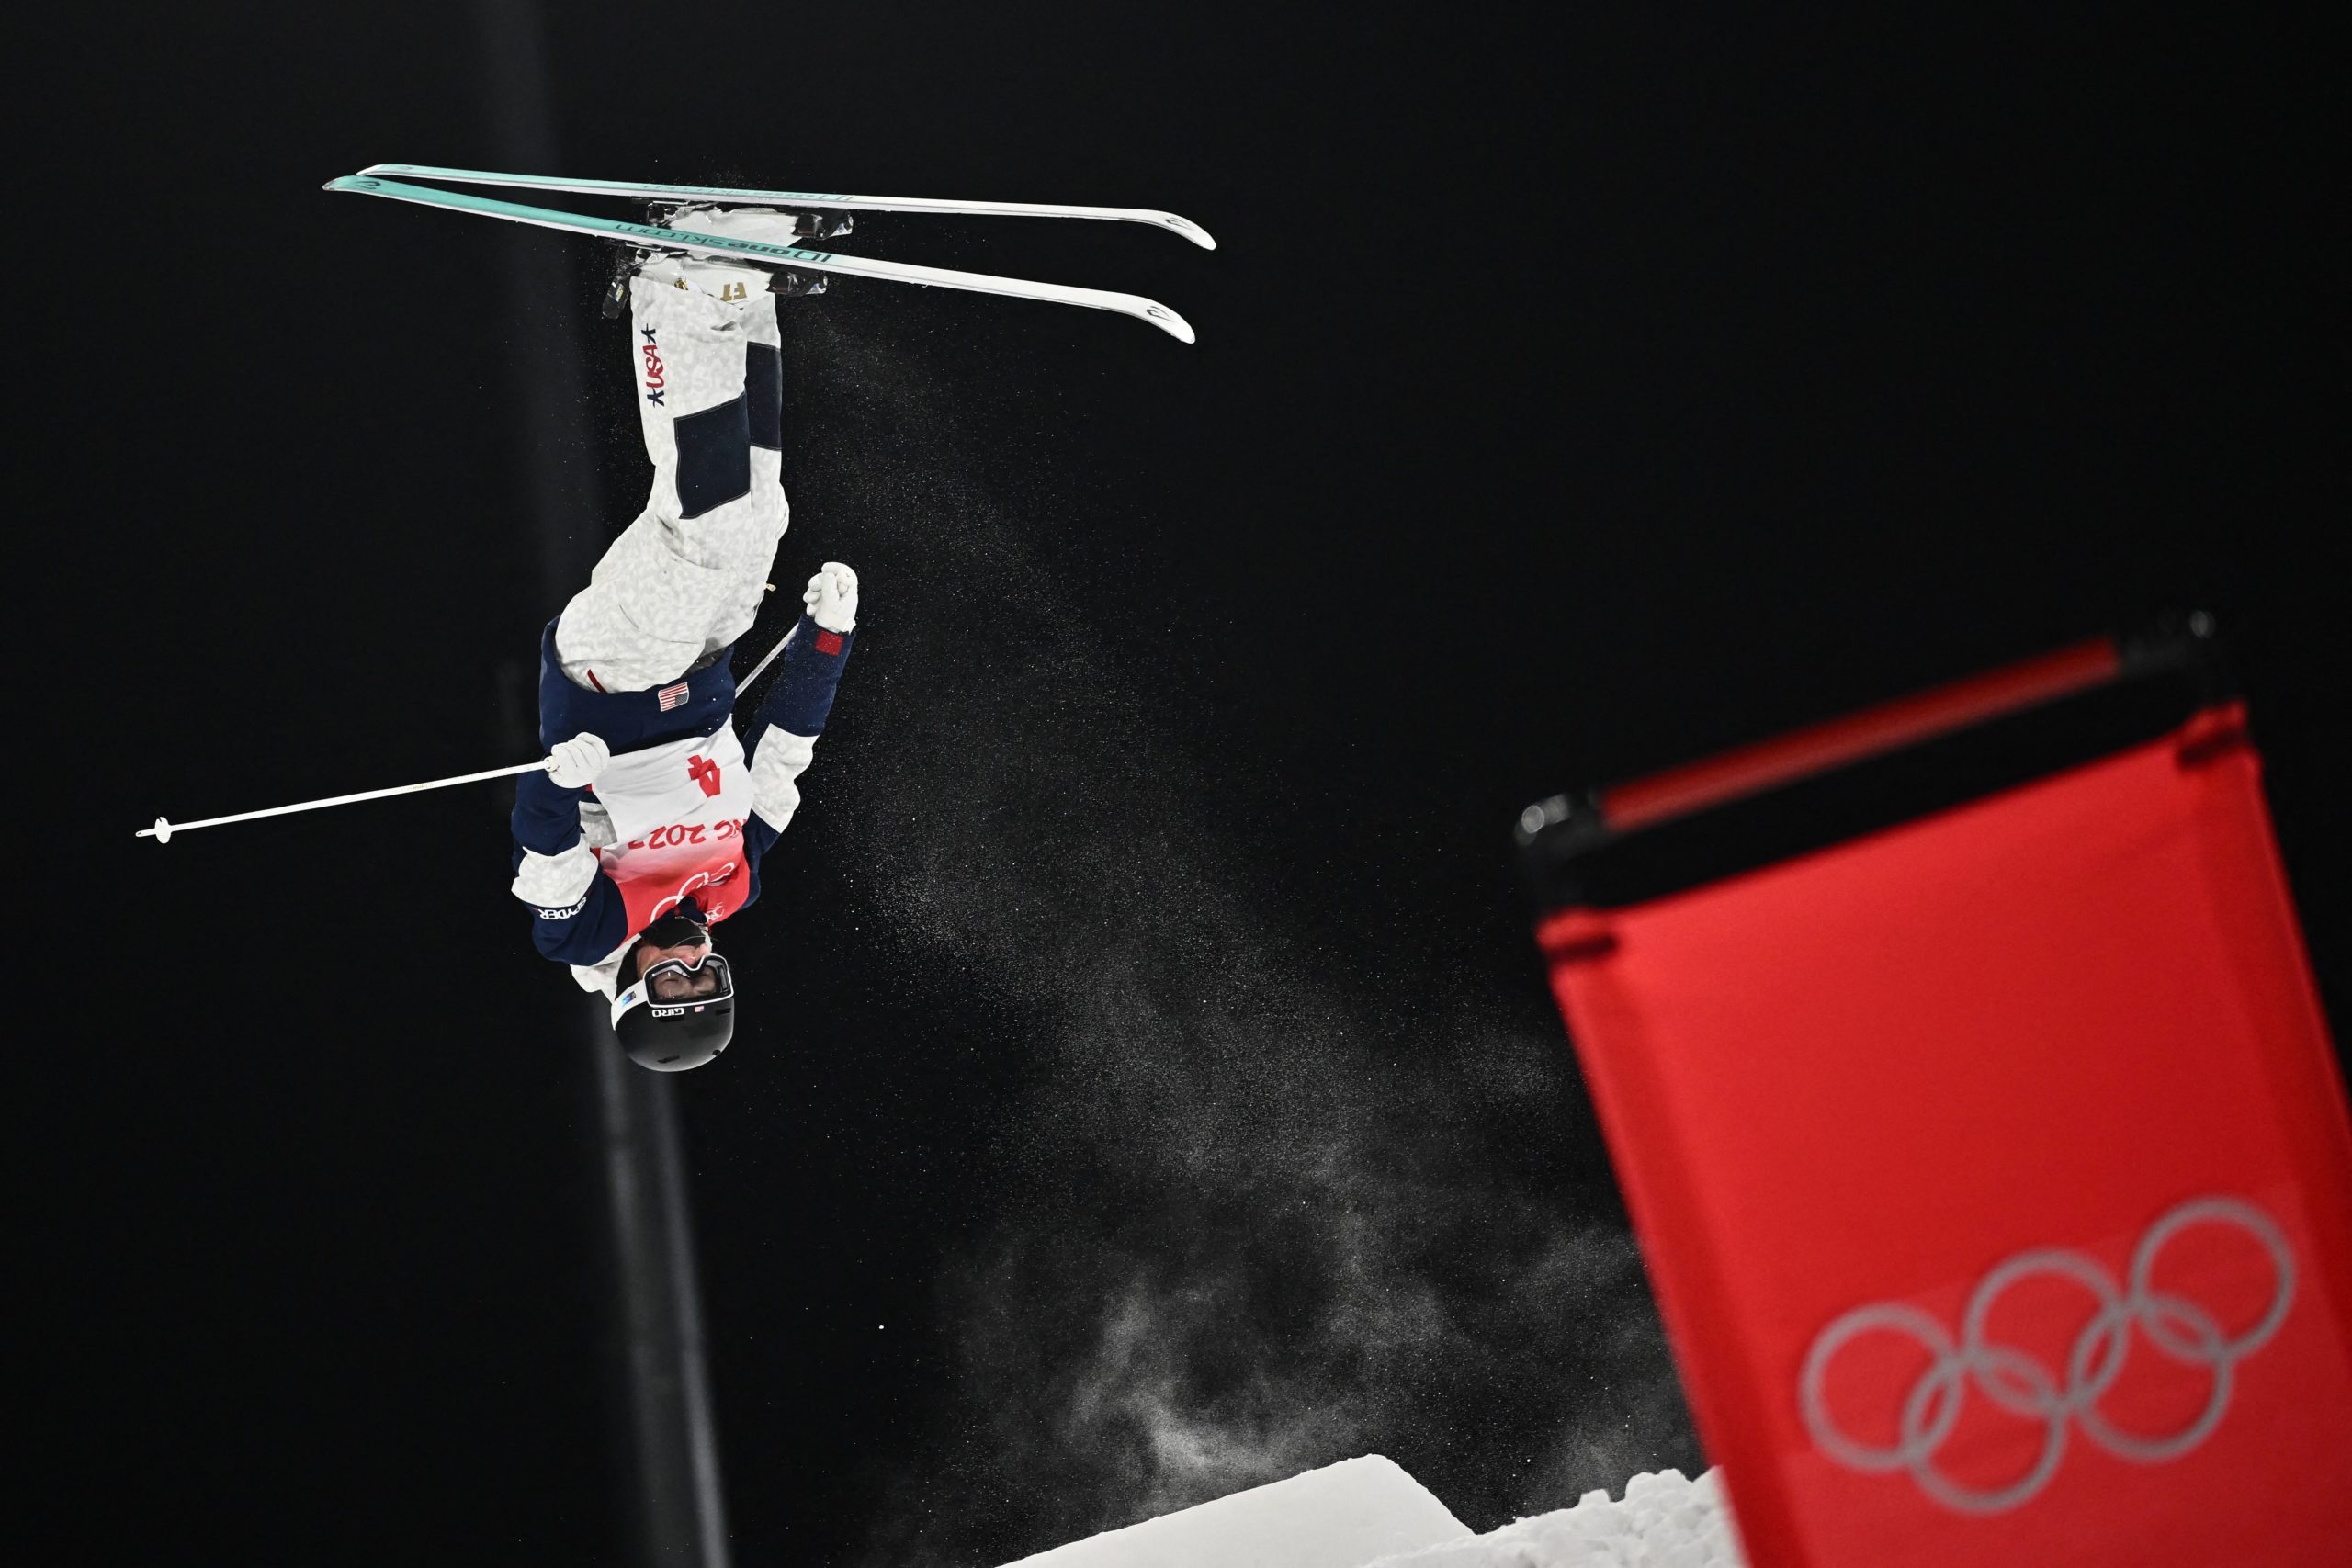 An athlete fromt the USA takes part in a Women's freestyle skiing moguls practice session at Genting Snow Park in Zhangjiakou on February 1, 2022, ahead of the Beijing 2022 Winter Olympic Games. (Photo by Marco BERTORELLO / AFP) (Photo by MARCO BERTORELLO/AFP via Getty Images)